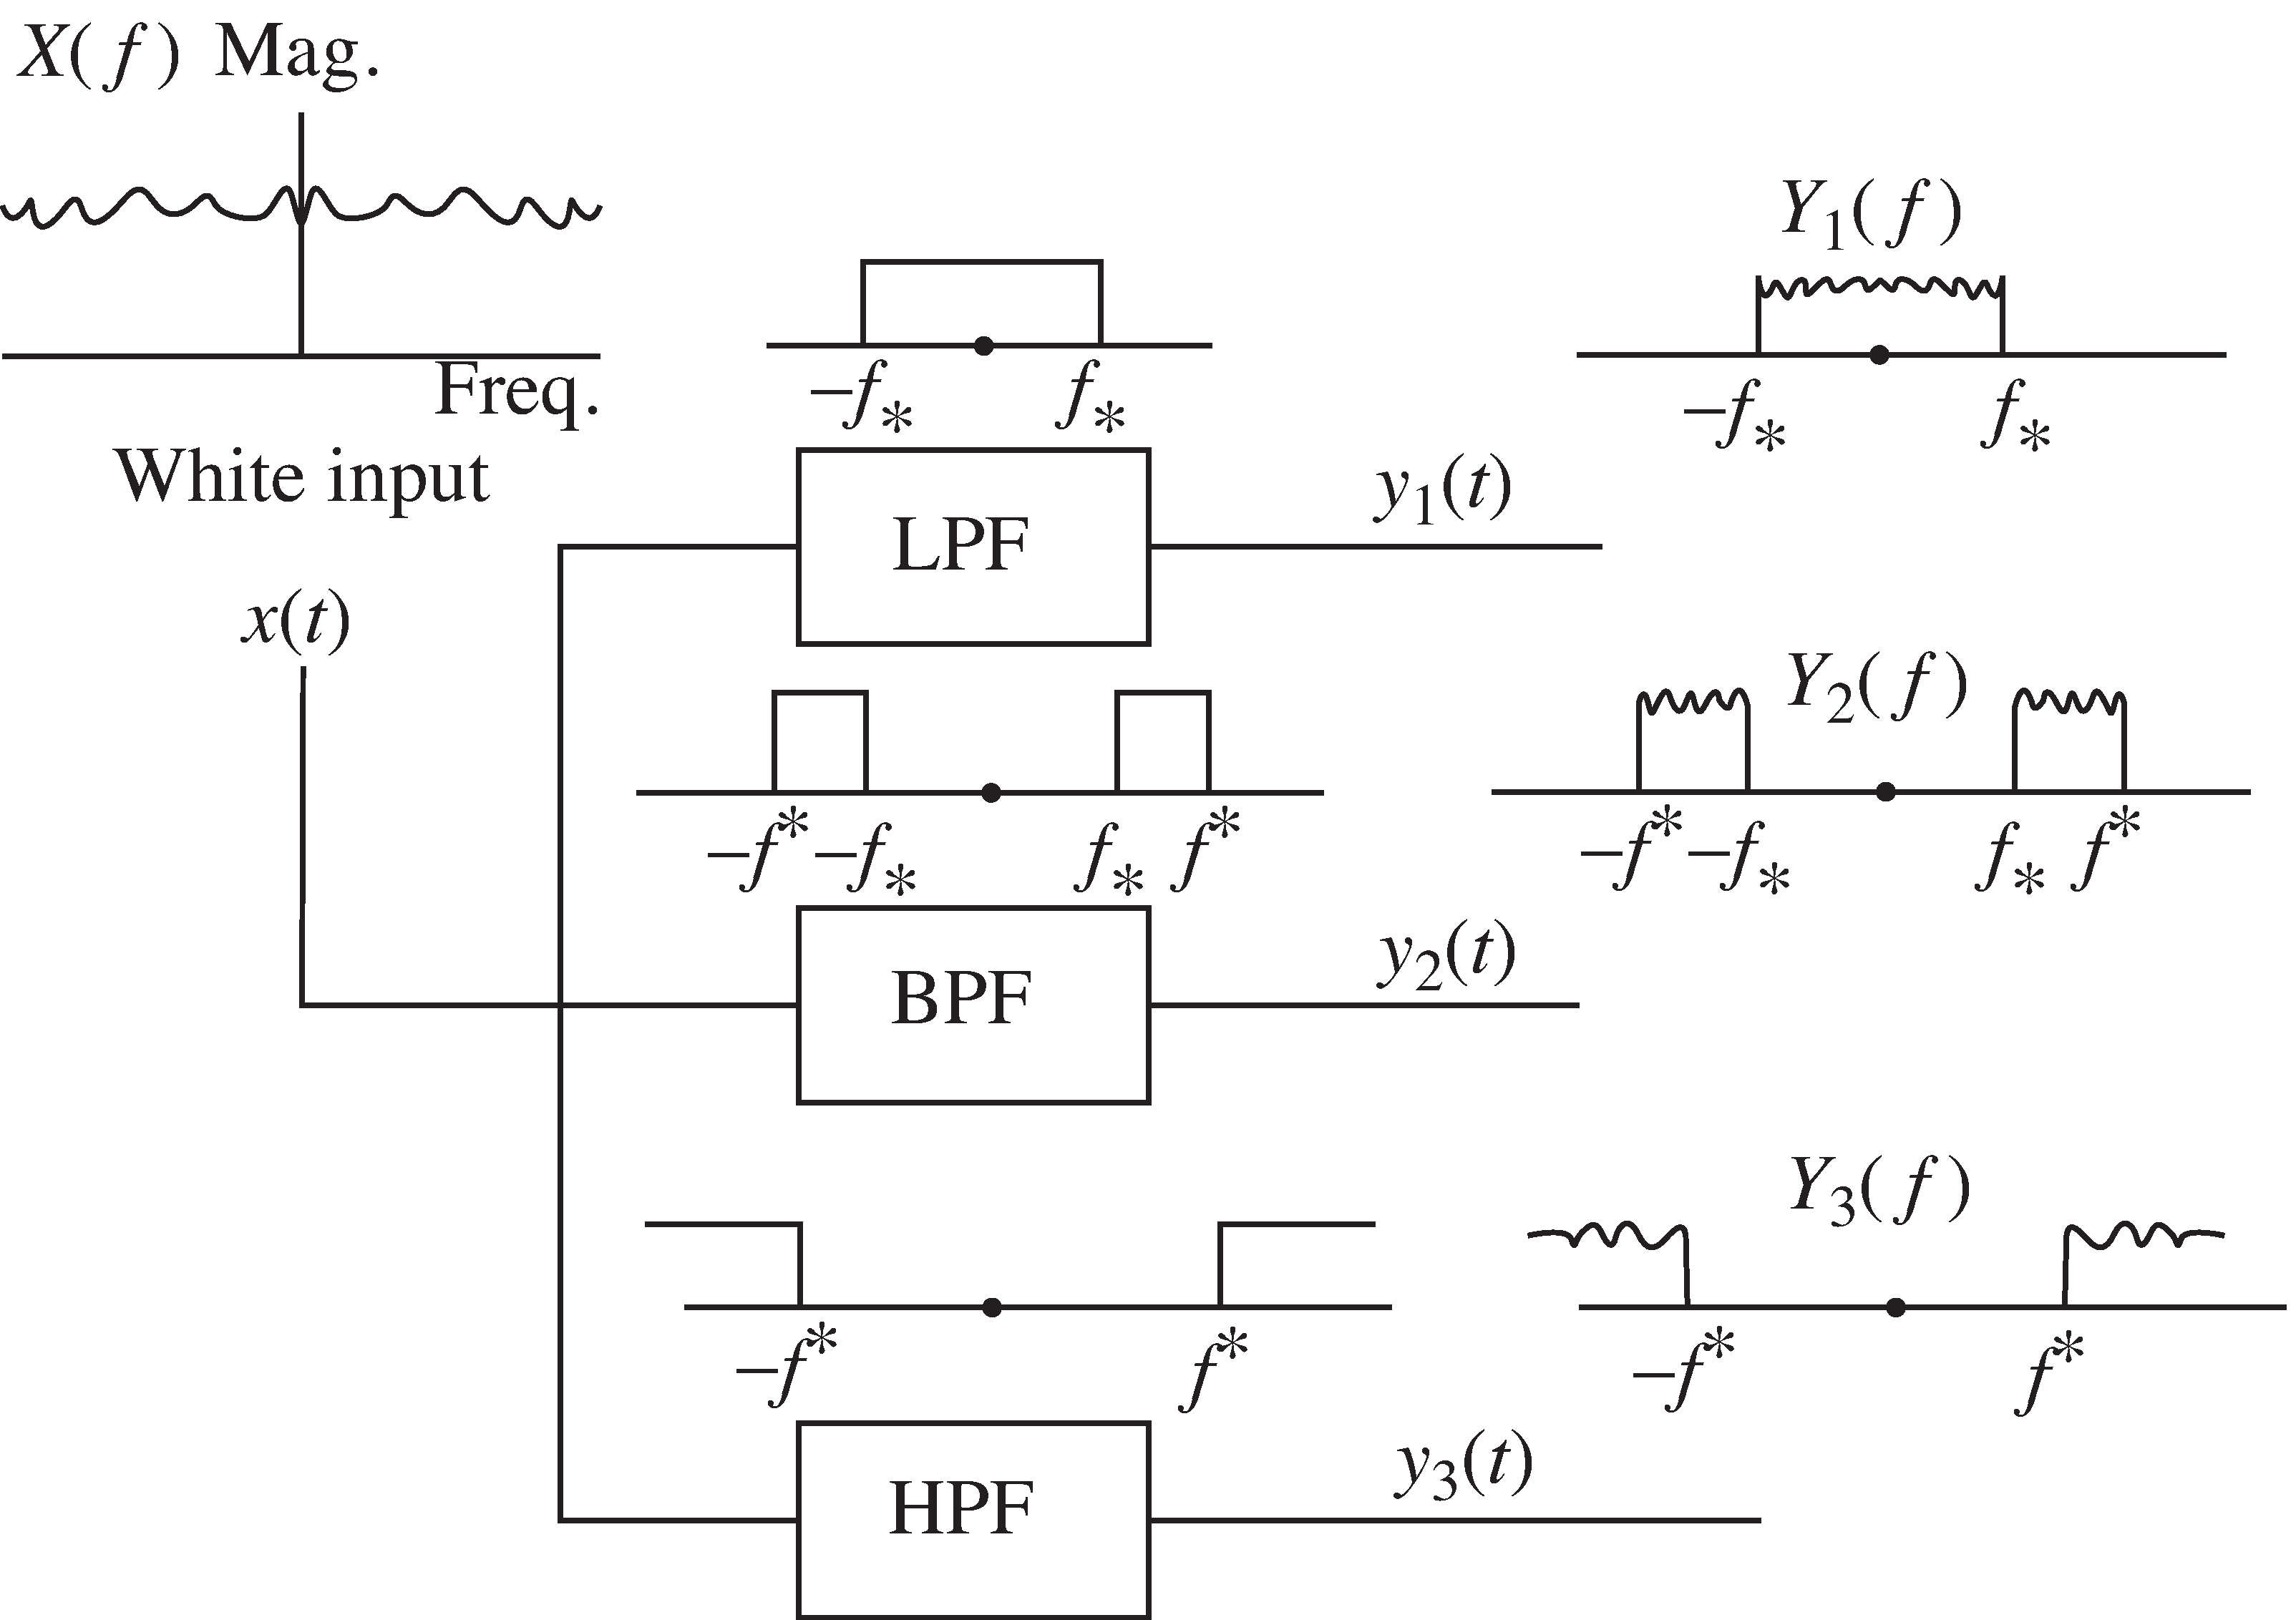 A “white” signal containing all frequencies is passed through a lowpass filter (LPF) leaving only the low frequencies, a bandpass filter (BPF) leaving only the middle frequencies and a highpass filter (HPF) leaving only the high frequencies.